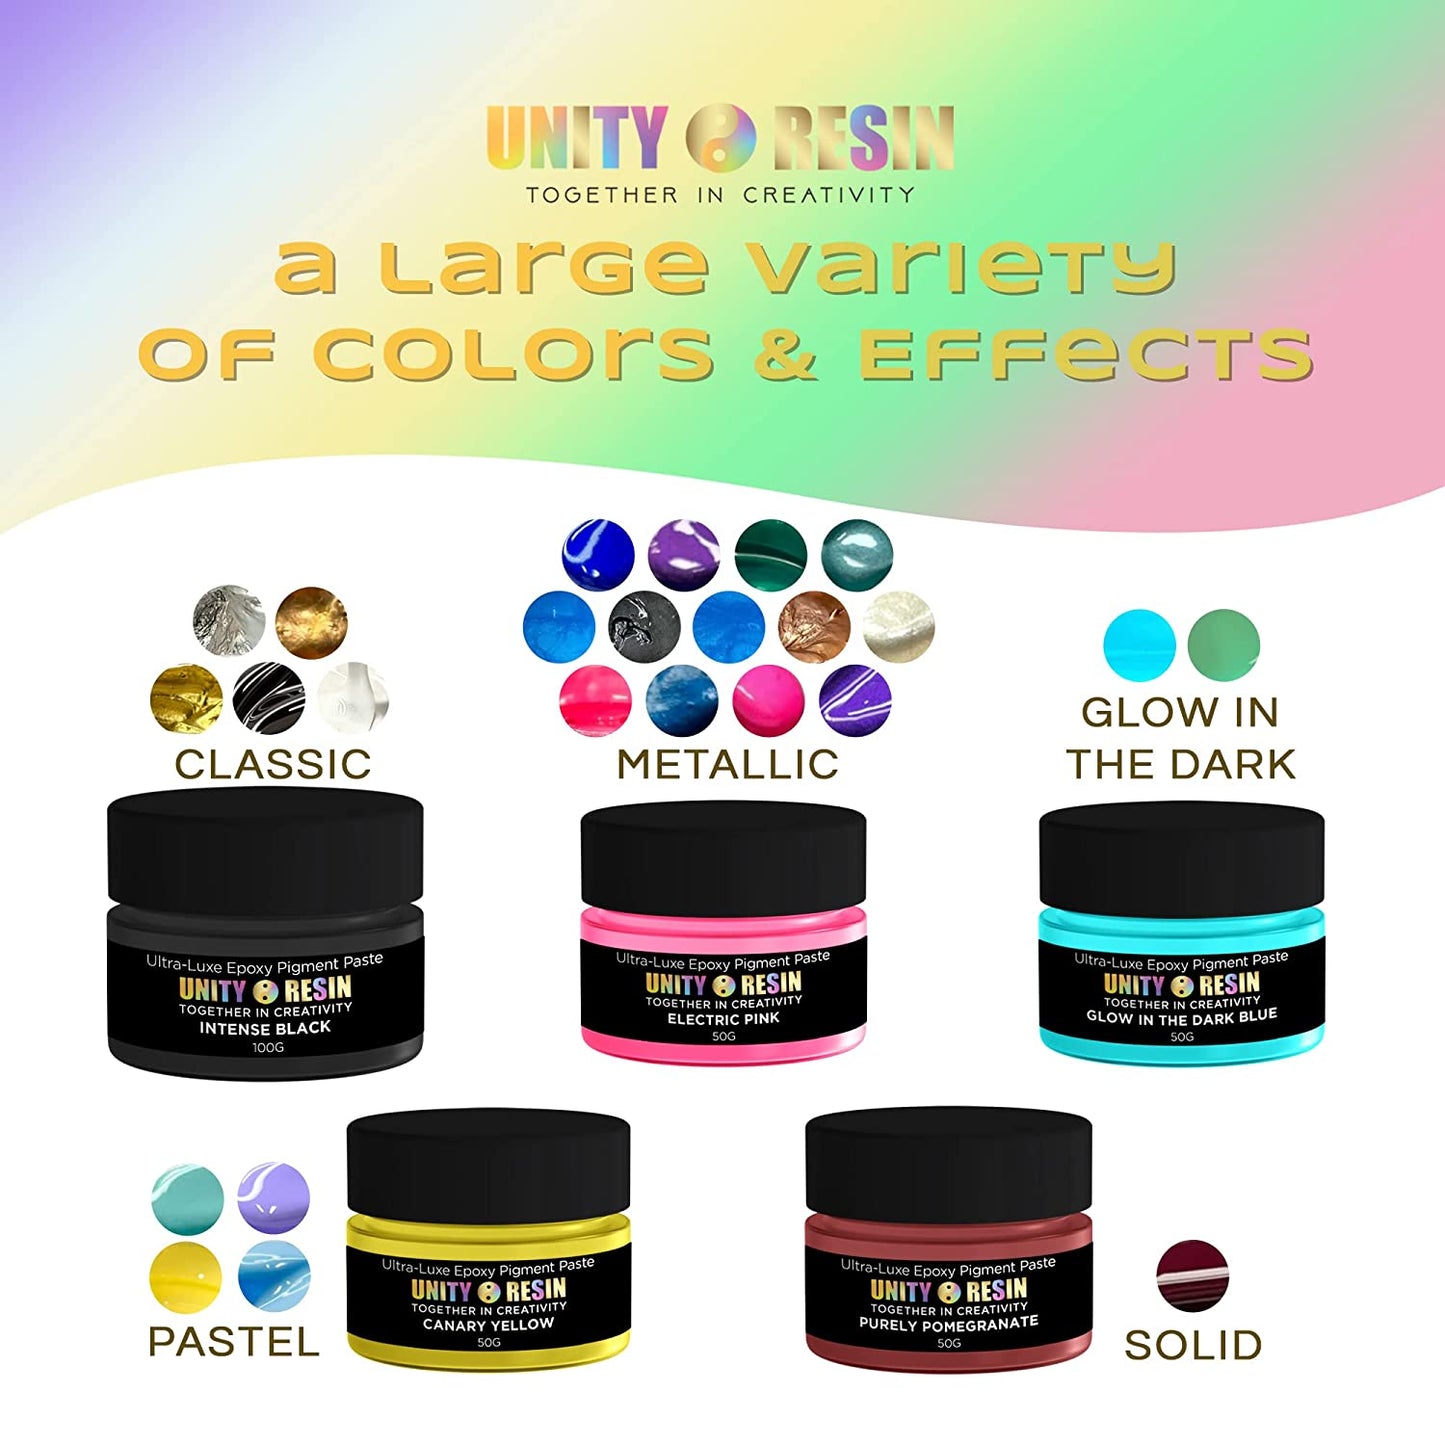 Ultra-Luxe Epoxy Resin Pigment Paste- ROBINS EGG (50G).